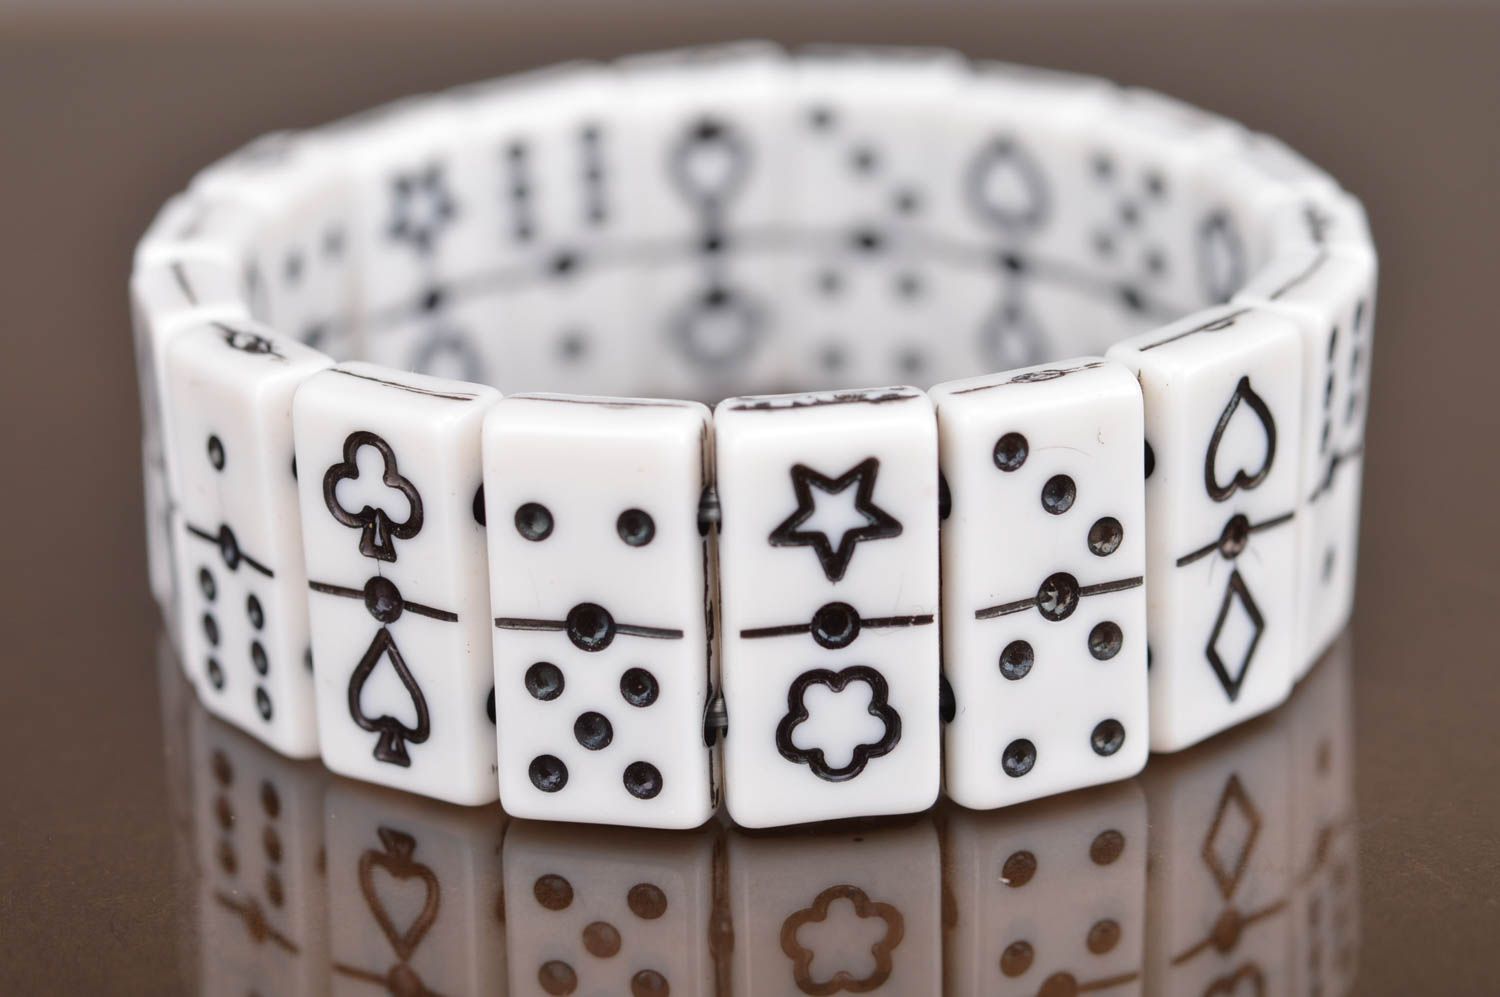 Black and white bracelet made of flat beads in shape of dominoes counters photo 2